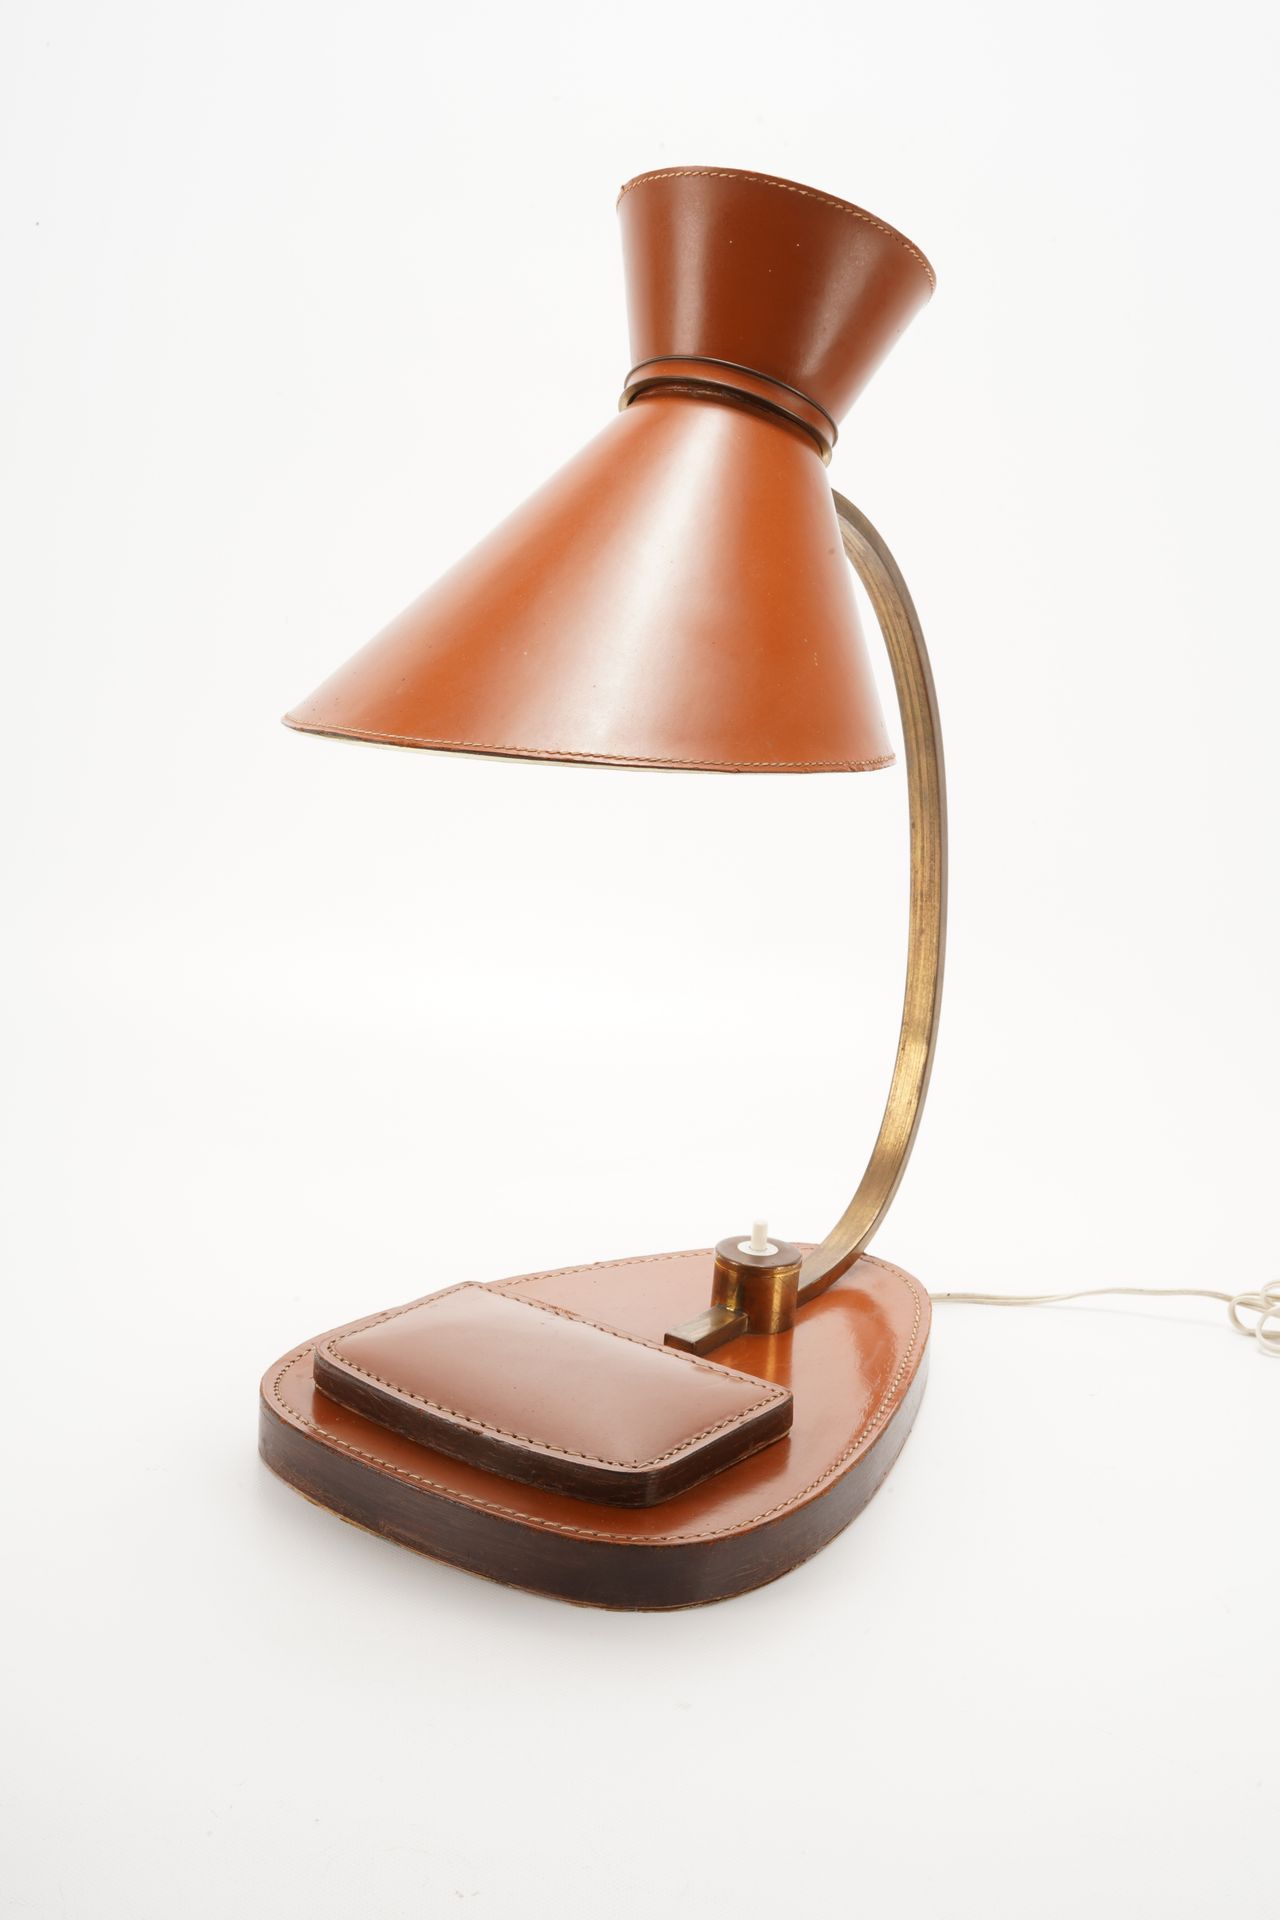 Jacques ADNET (1900-1984) Desk lamp diabolo, ca 1950. Brass and metal covered wi&hellip;